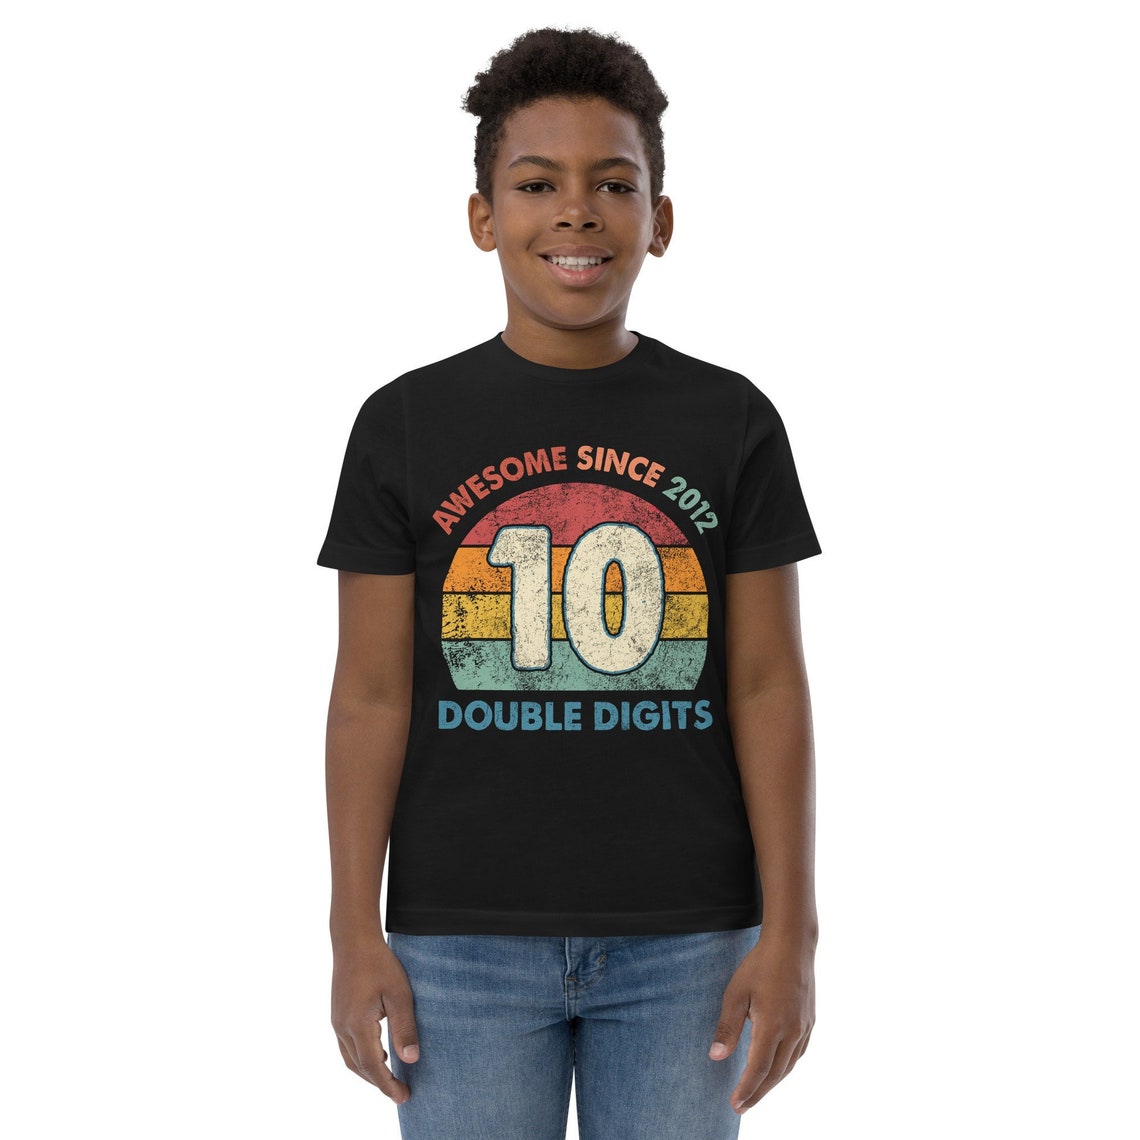 10th Birthday Shirt, Awesome Since 2012, Double Digits